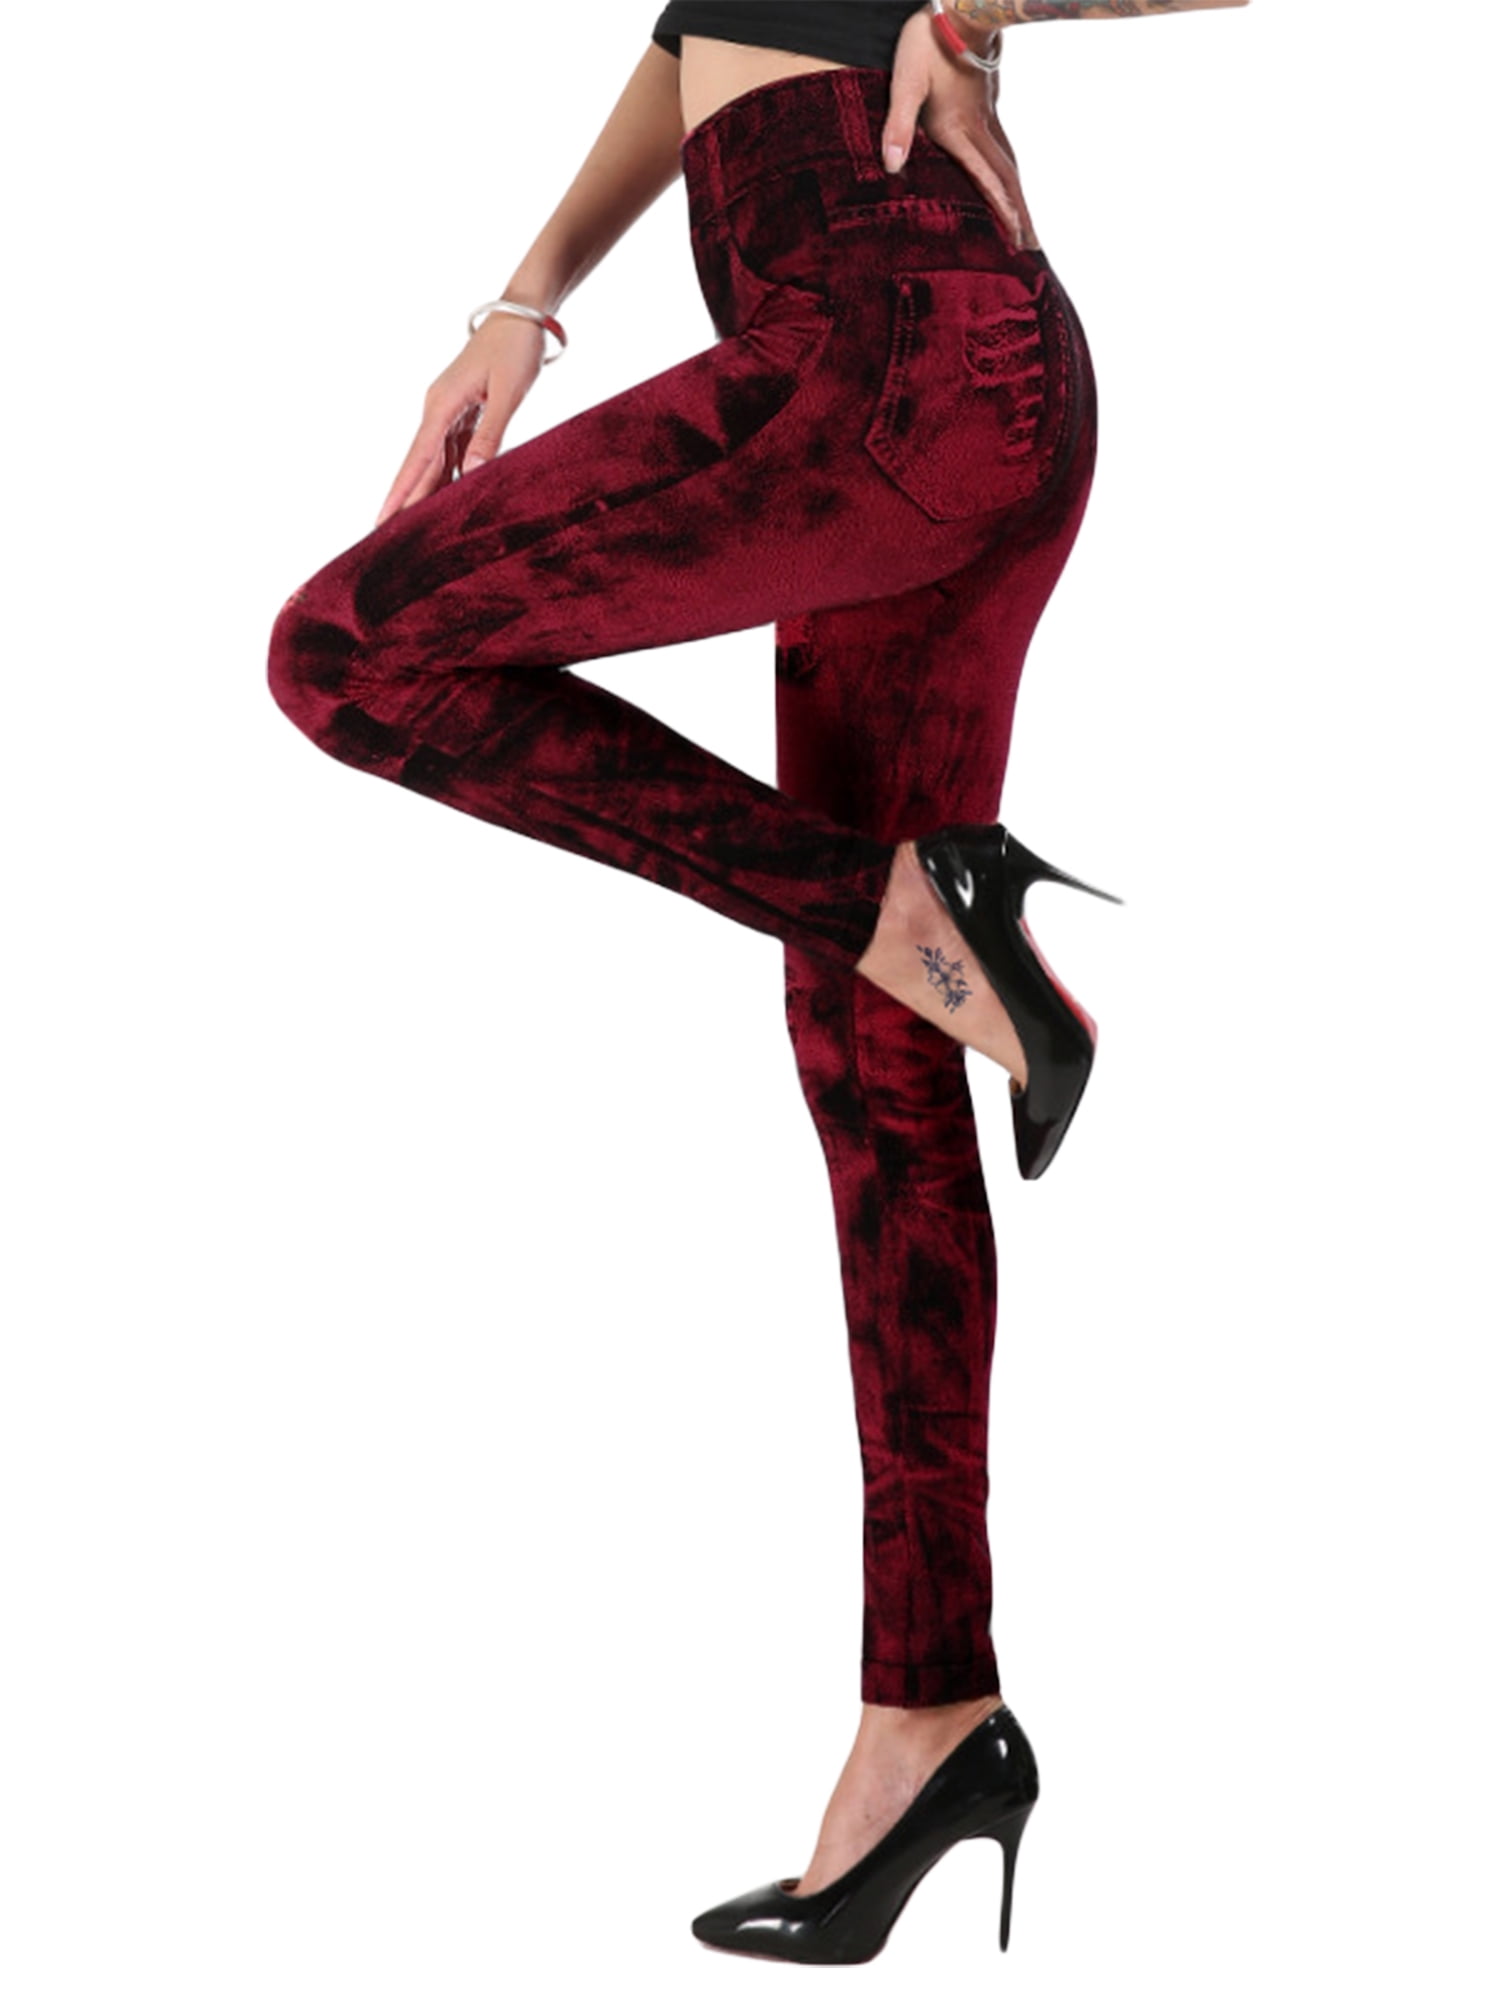 New women Snake Animal Print Legging Pants Party Out Full Soft Stretchy 8-22